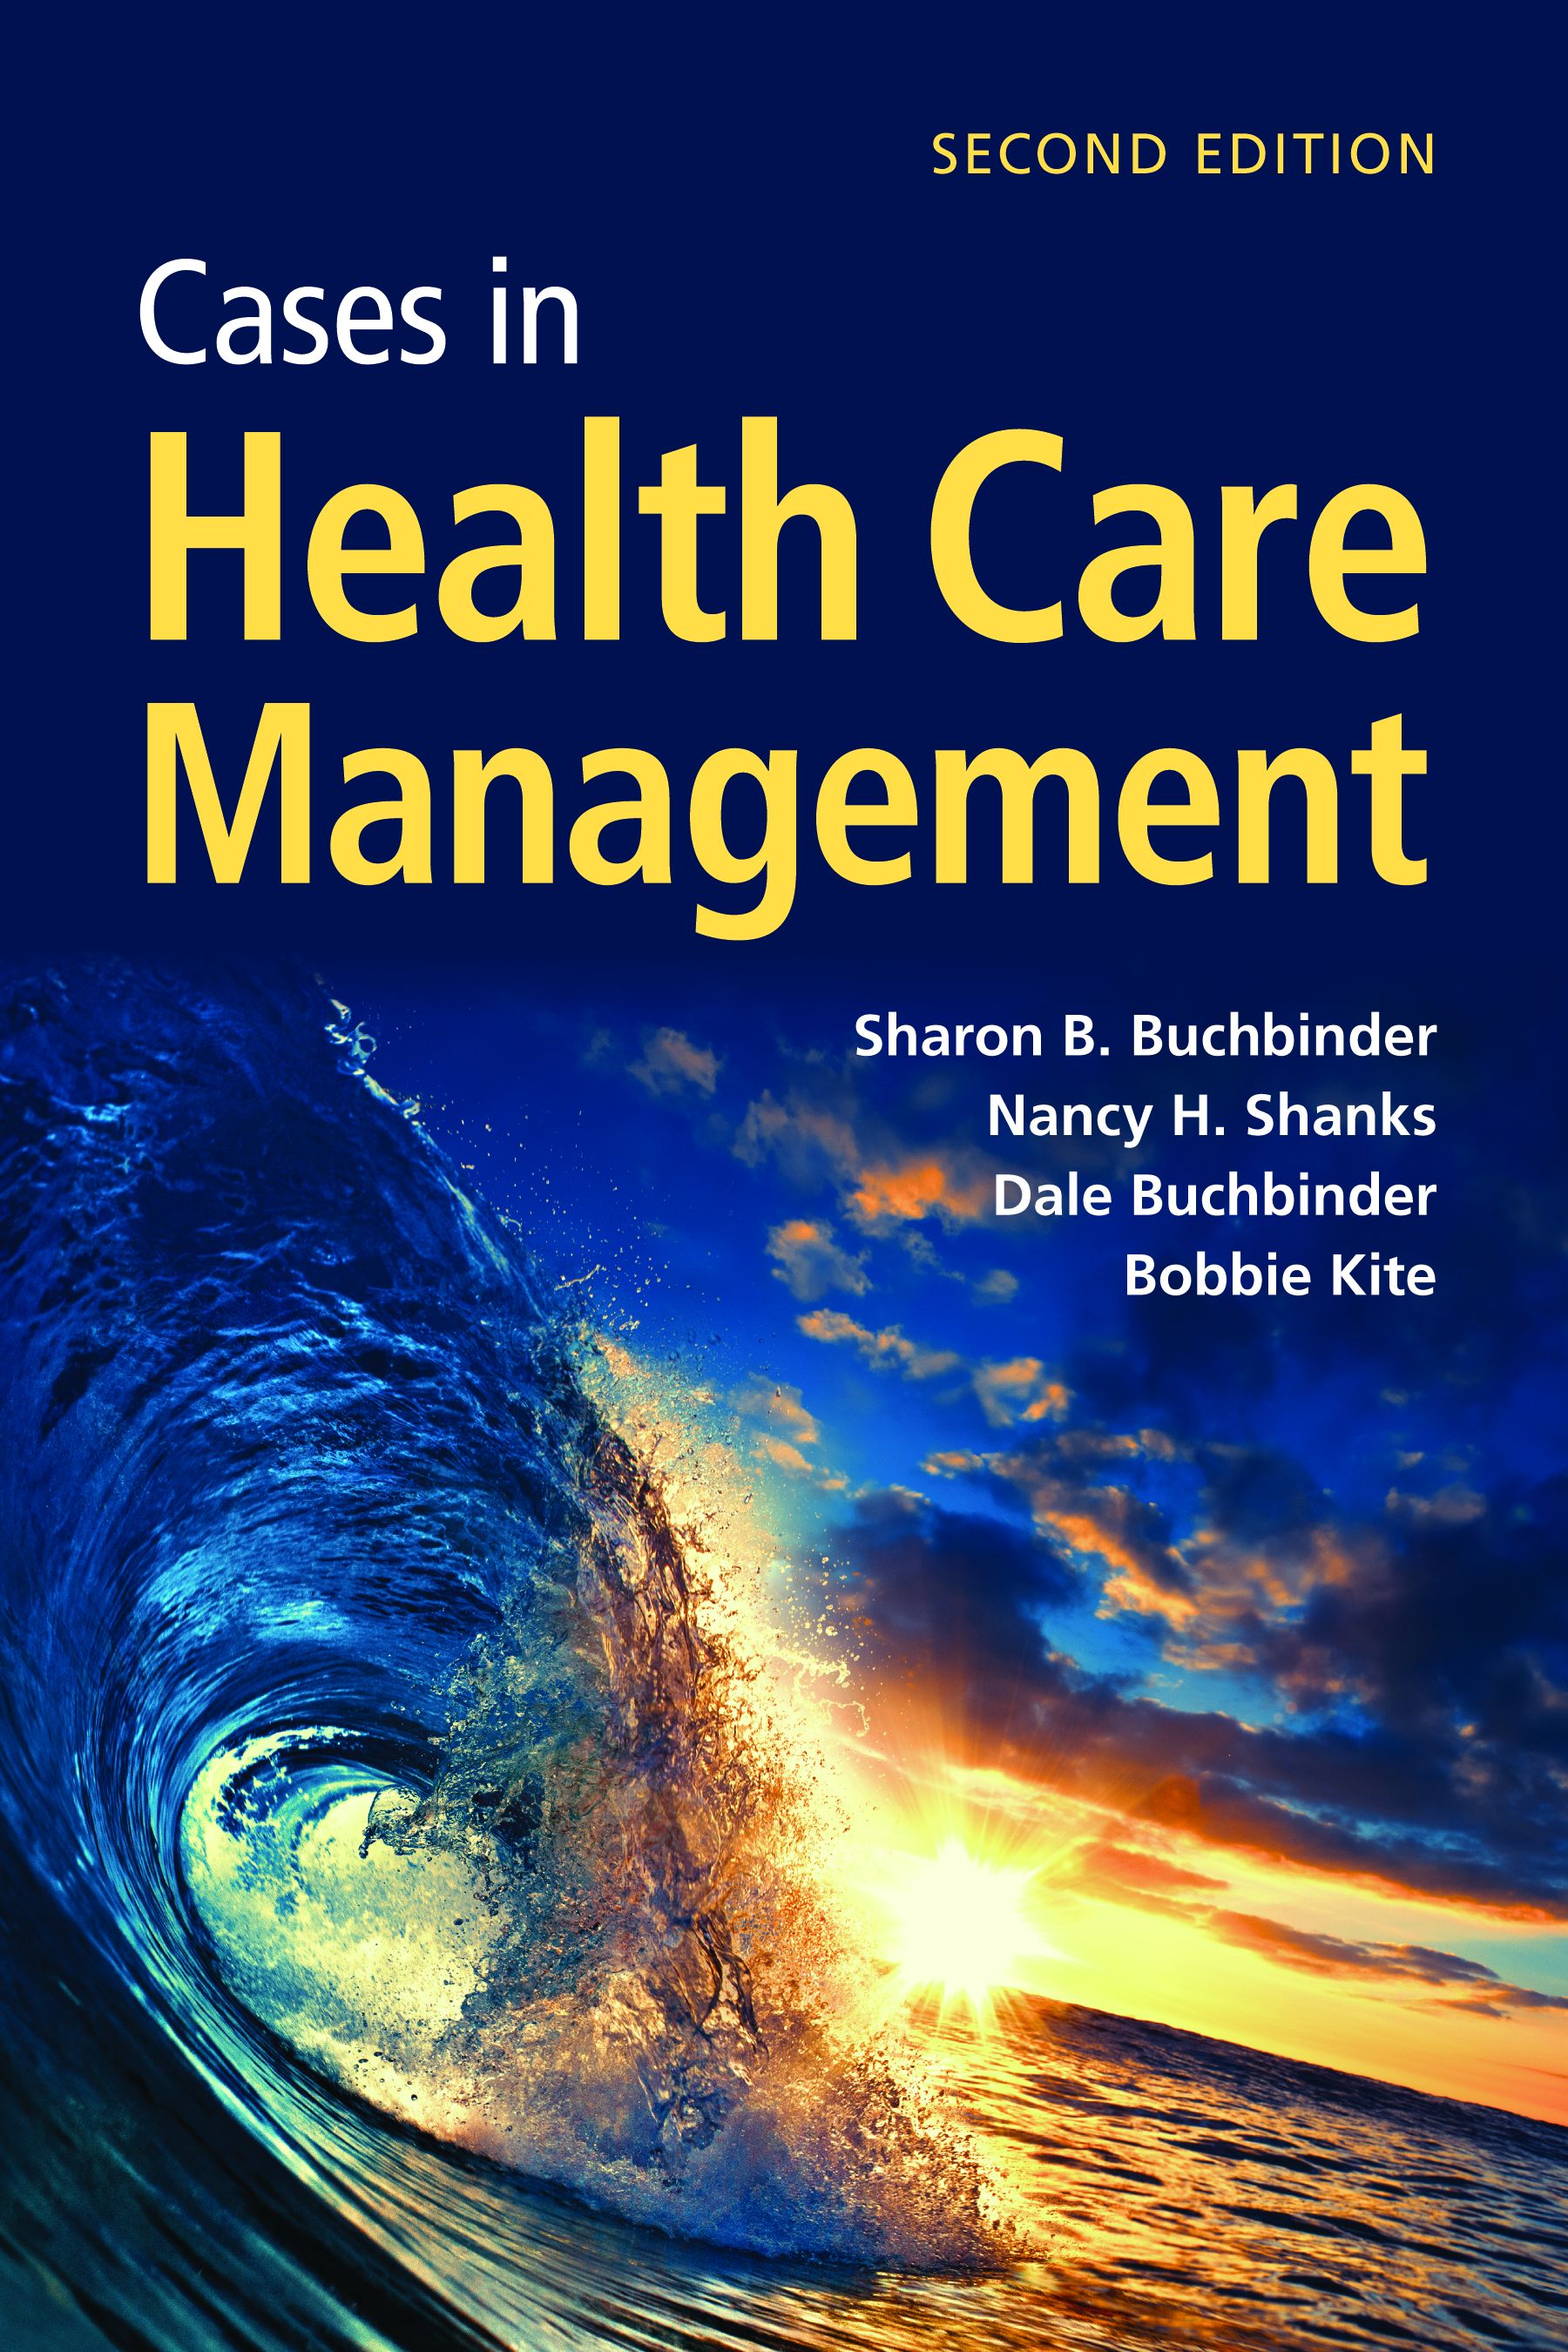 Cases in Health Care Management - image 1